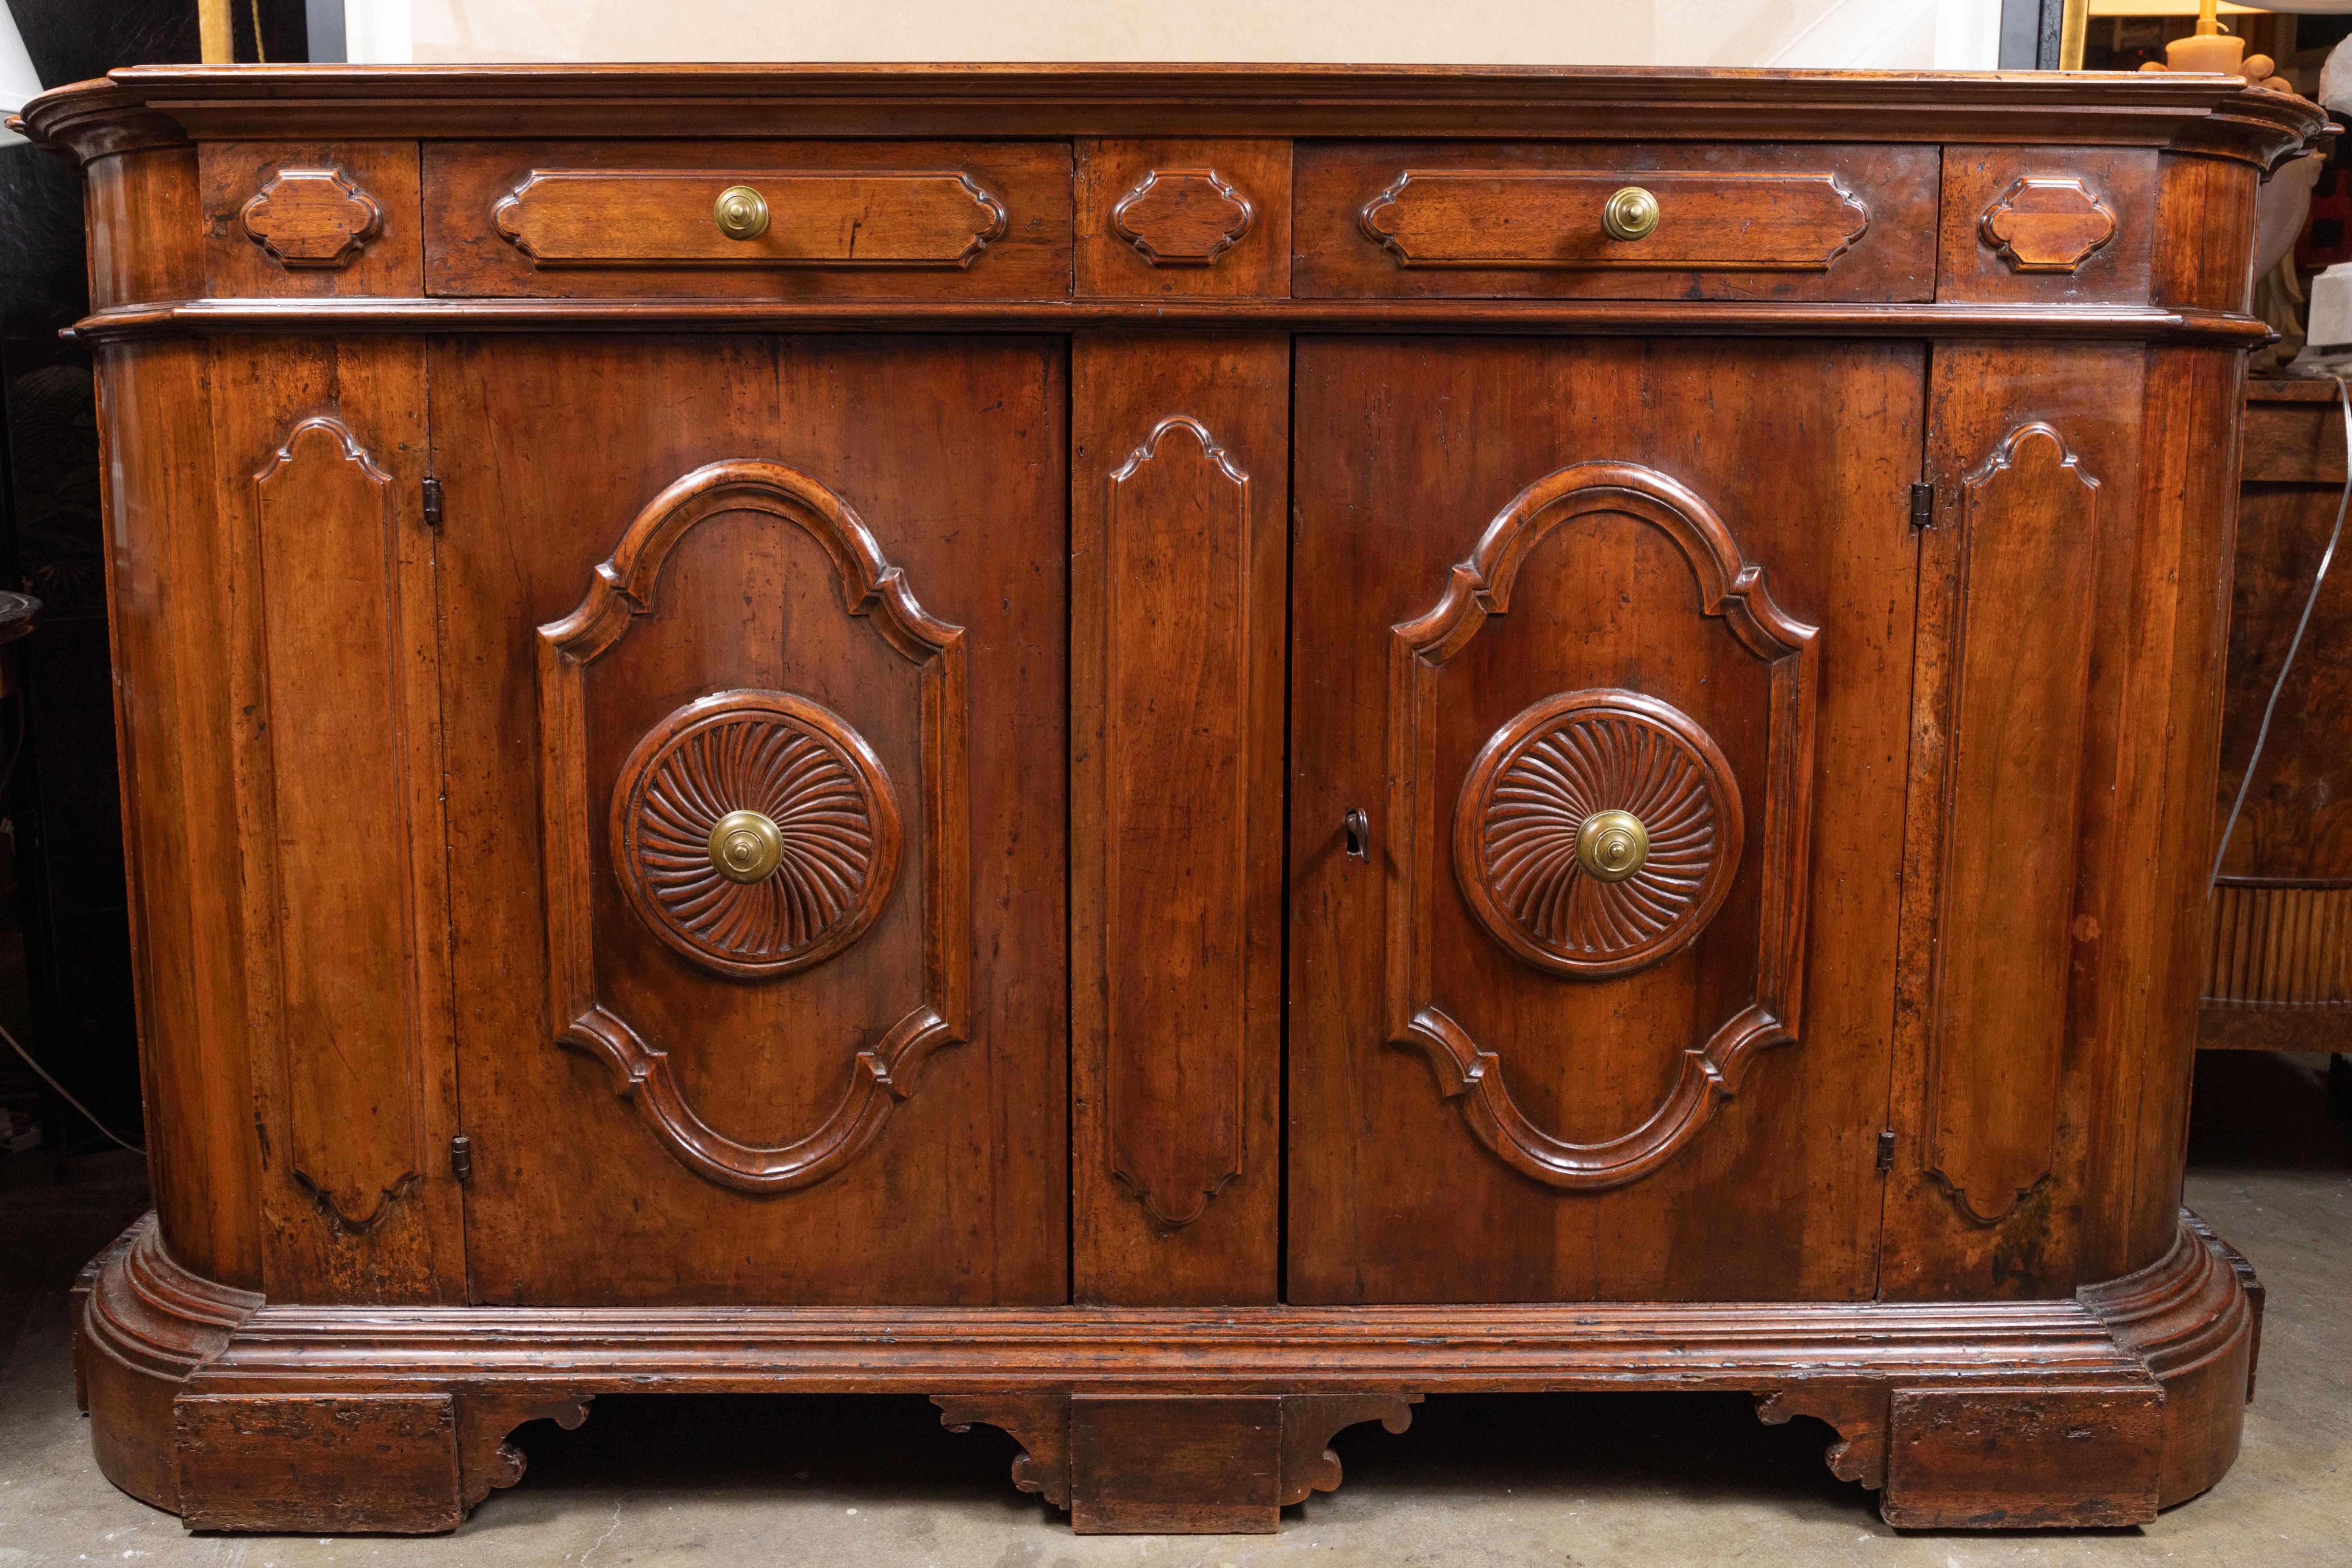 Stately, two-over-two, 1850s, hand carved, rounded edge, solid walnut buffet on a raised, stepped base of the same. The whole generously worked with both raised, and recessed panels. The newer, gilt bronze doorknobs are centered in elegant, whirled